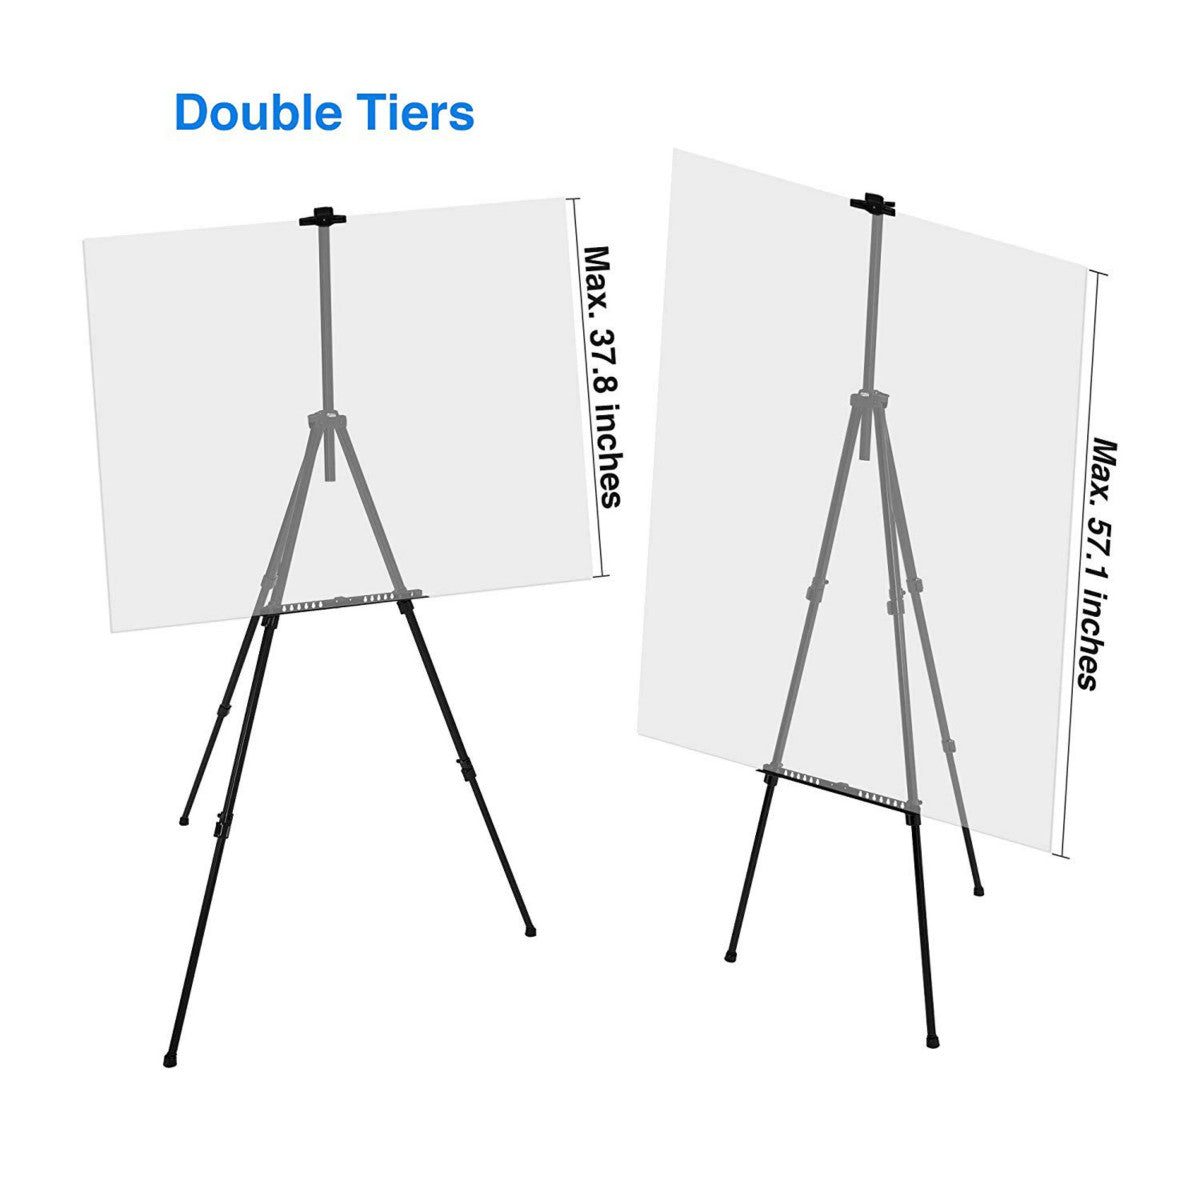 METAL EASEL(TRIPOD STAND/PAINTING STAND/ARTIST STAND